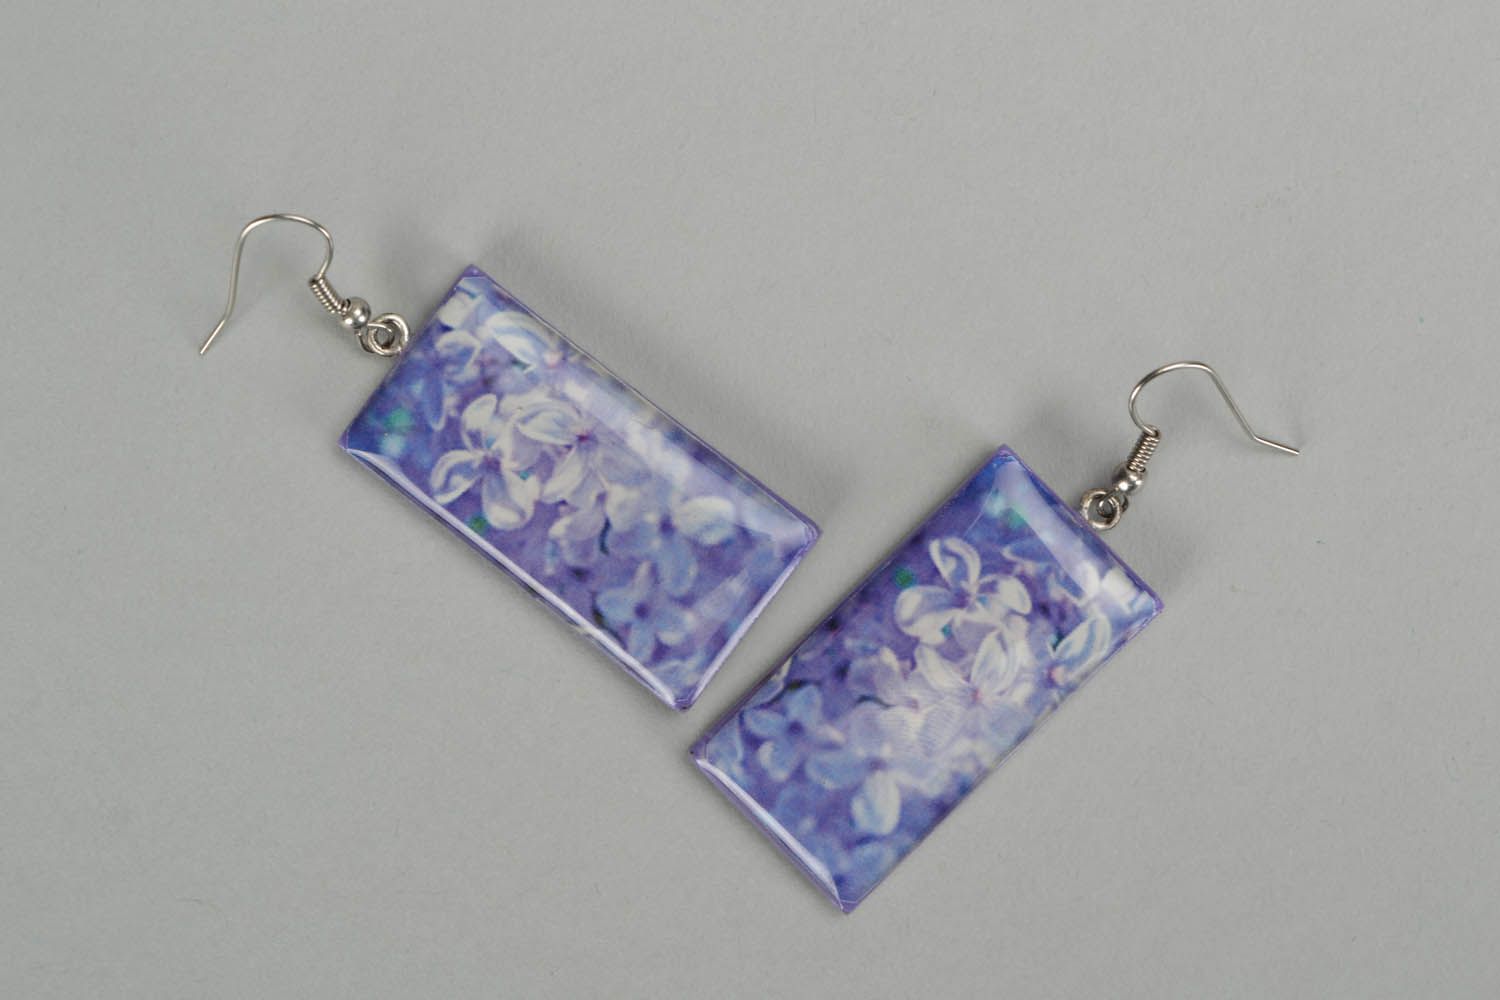 Earrings made of polymer clay and glaze photo 2